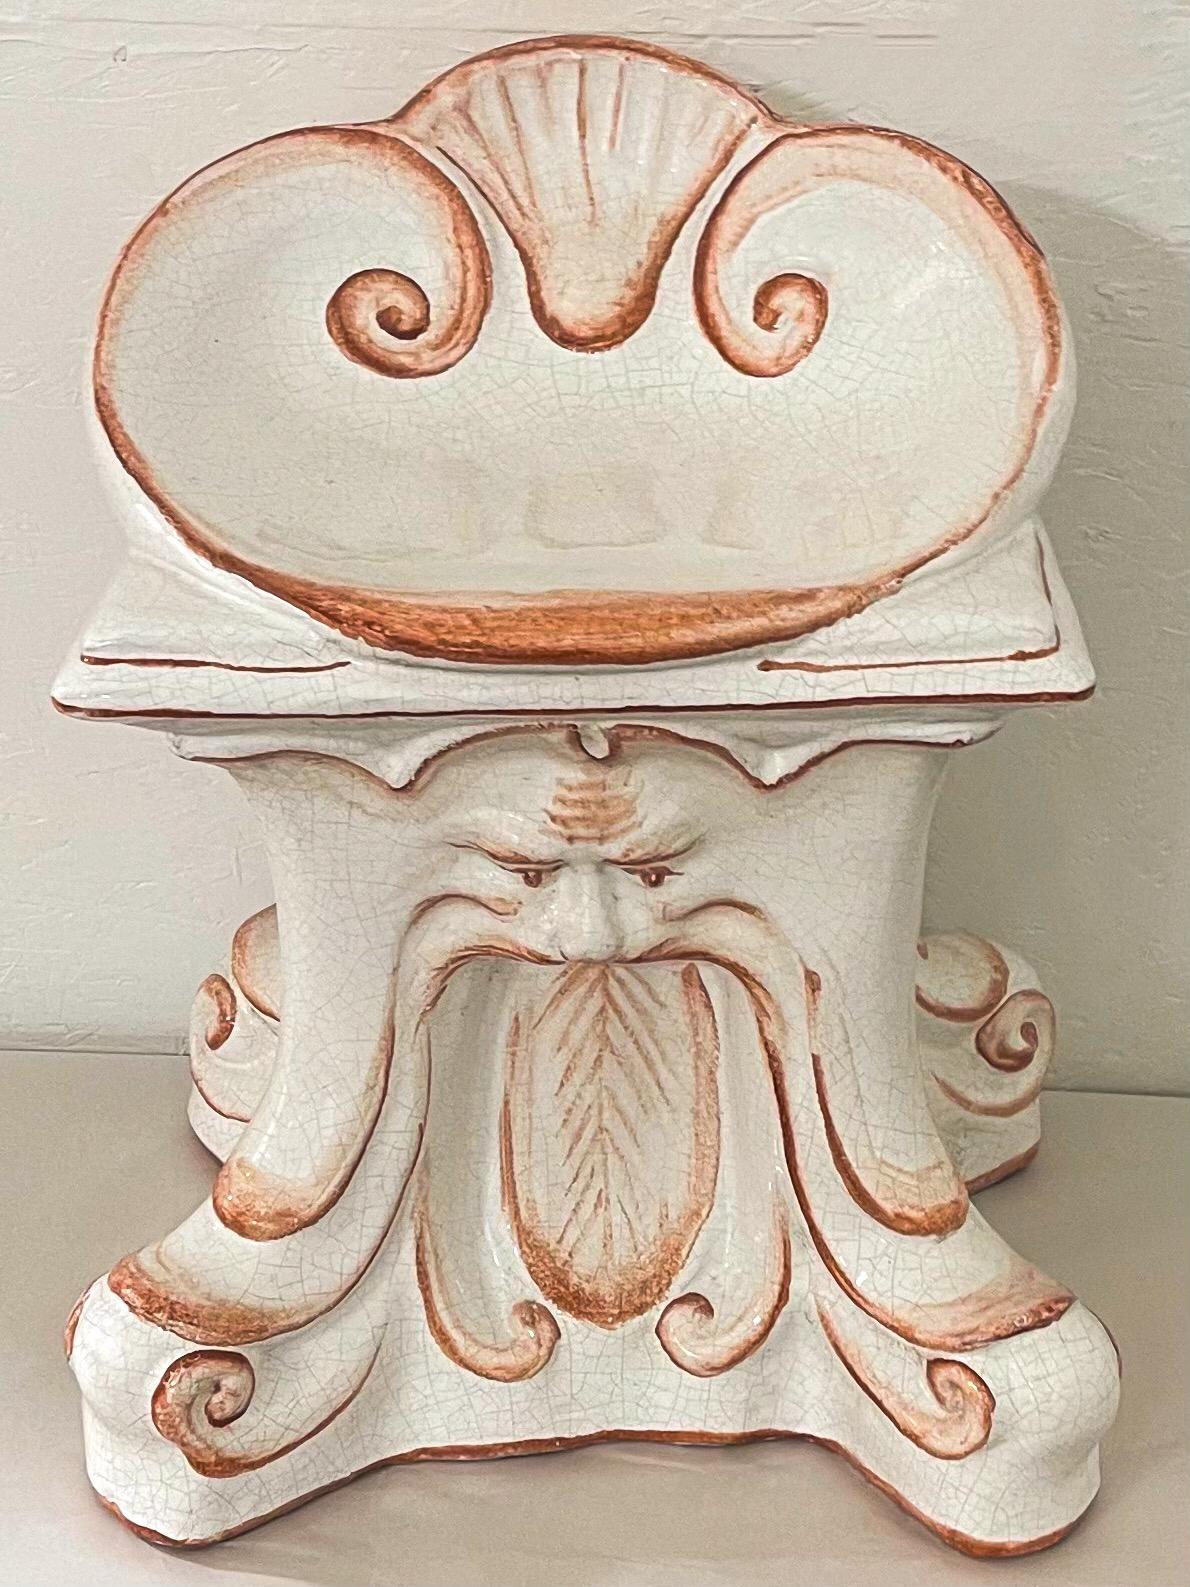 Hollywood Regency 1960s Italian Terracotta North Wind and Shell Motif Garden Seat / Chair / Stool